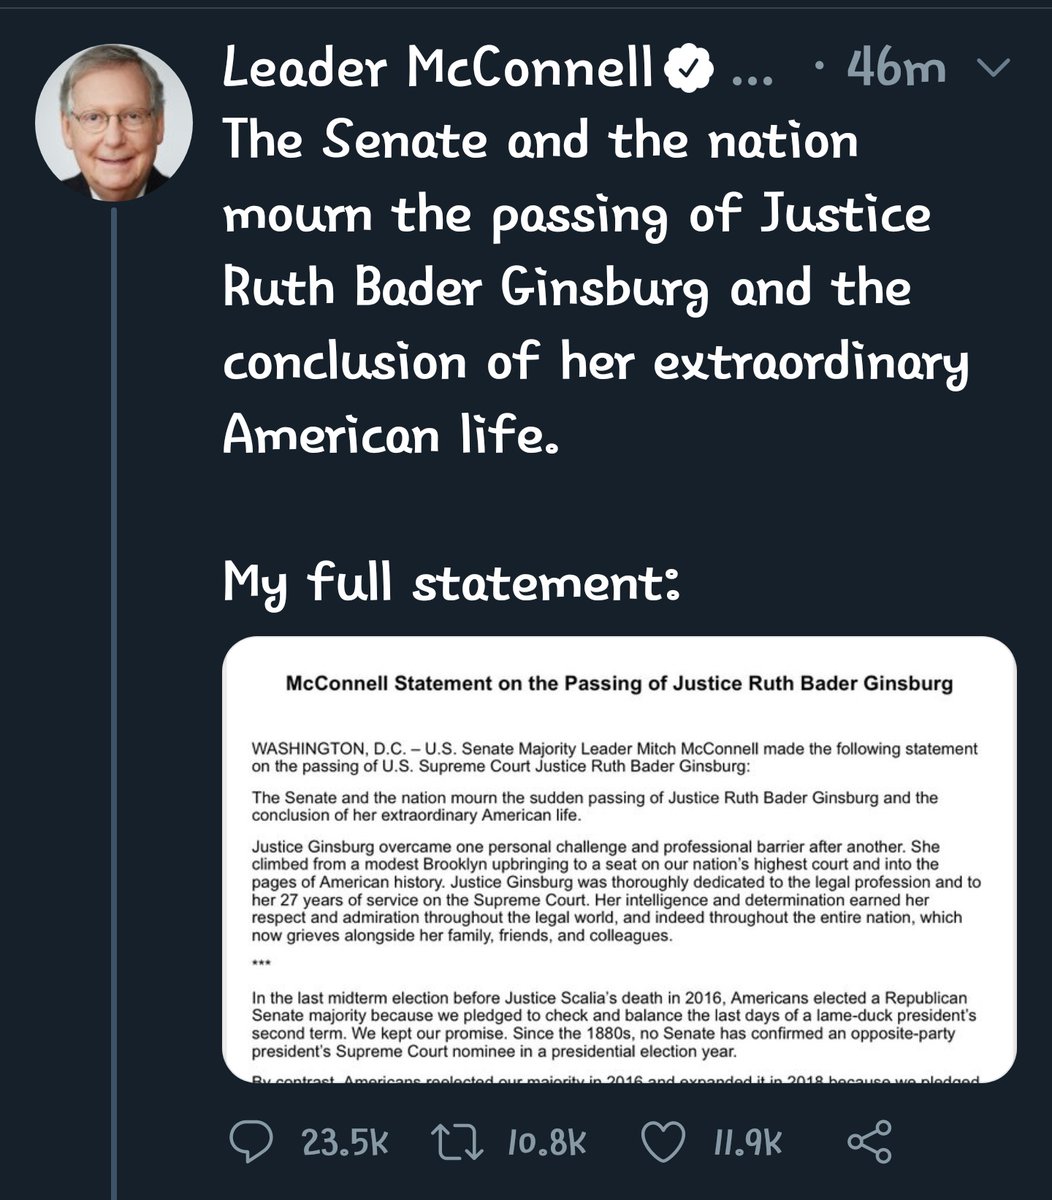 Not even 30 minutes after we were told that Ruth Bader Ginsburg passed away, the SOB McConnell is giving Trump his 3rd Supreme Court judge less than 2 months before a presidential election. HE couldn't even wait until she was buried or even mourned an hour!  #RIPRuthBaderGinsburg